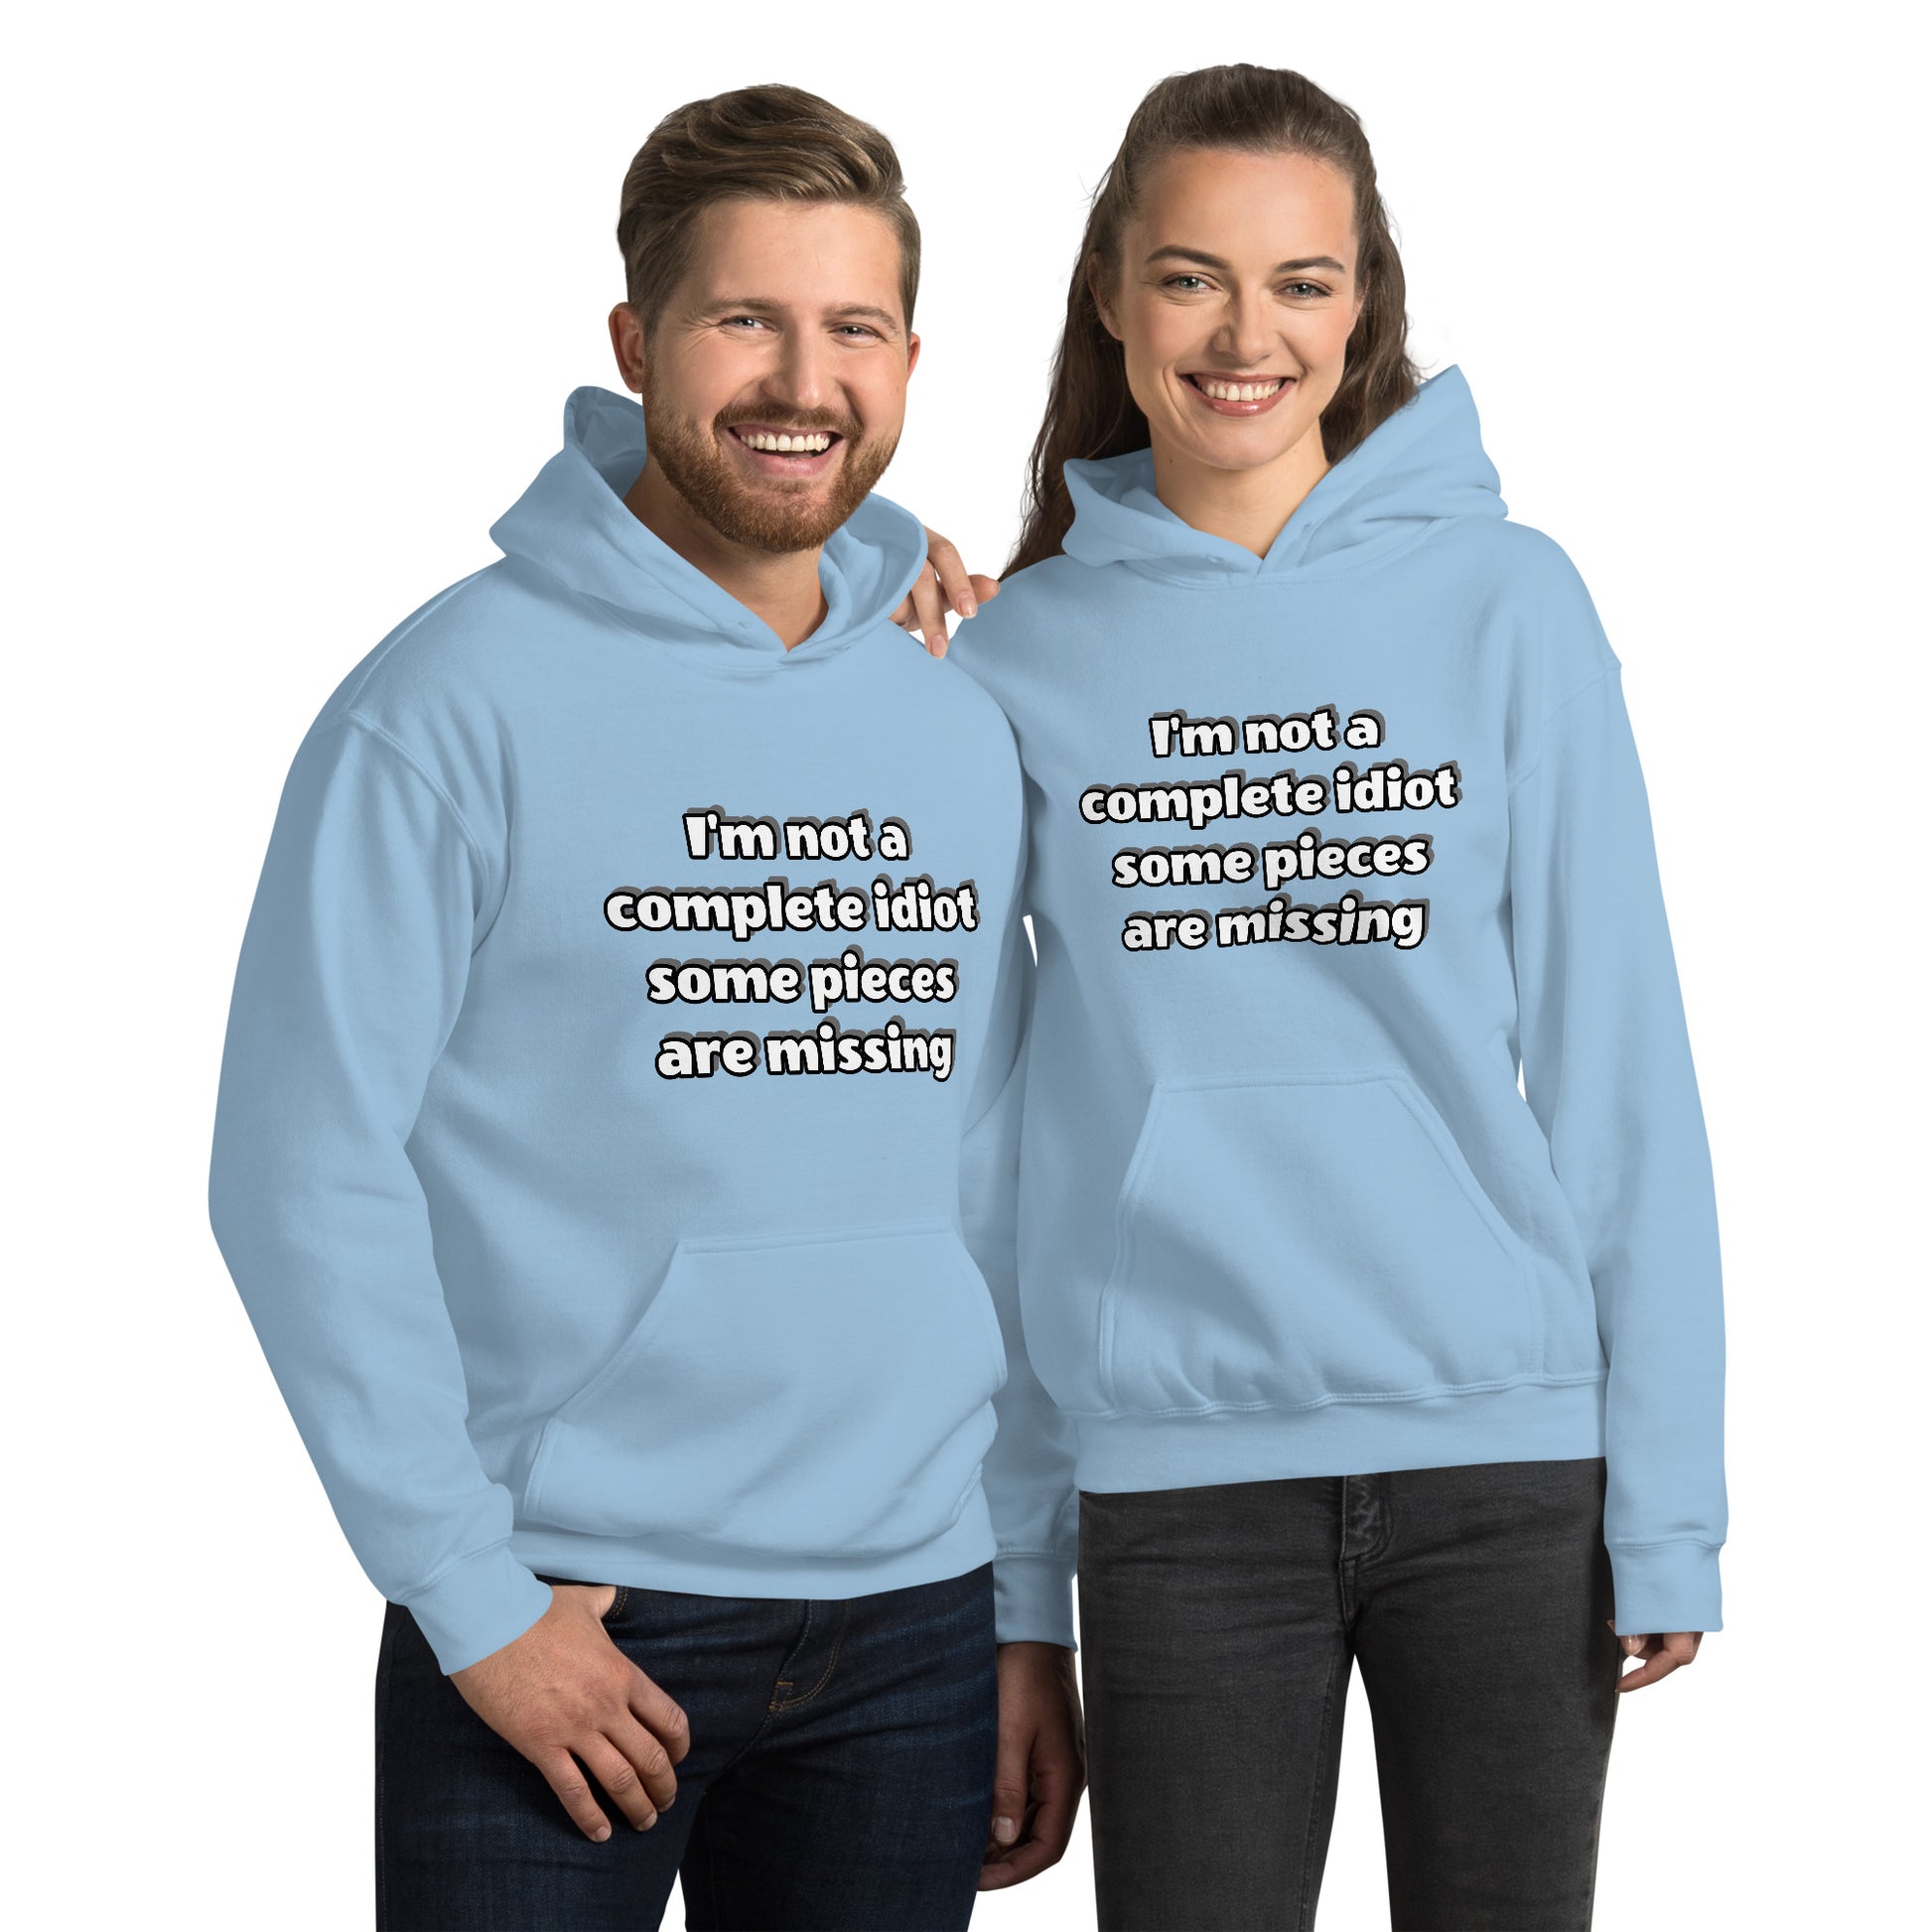 Men and women with light blue hoodie with text “I’m not a complete idiot, some pieces are missing”